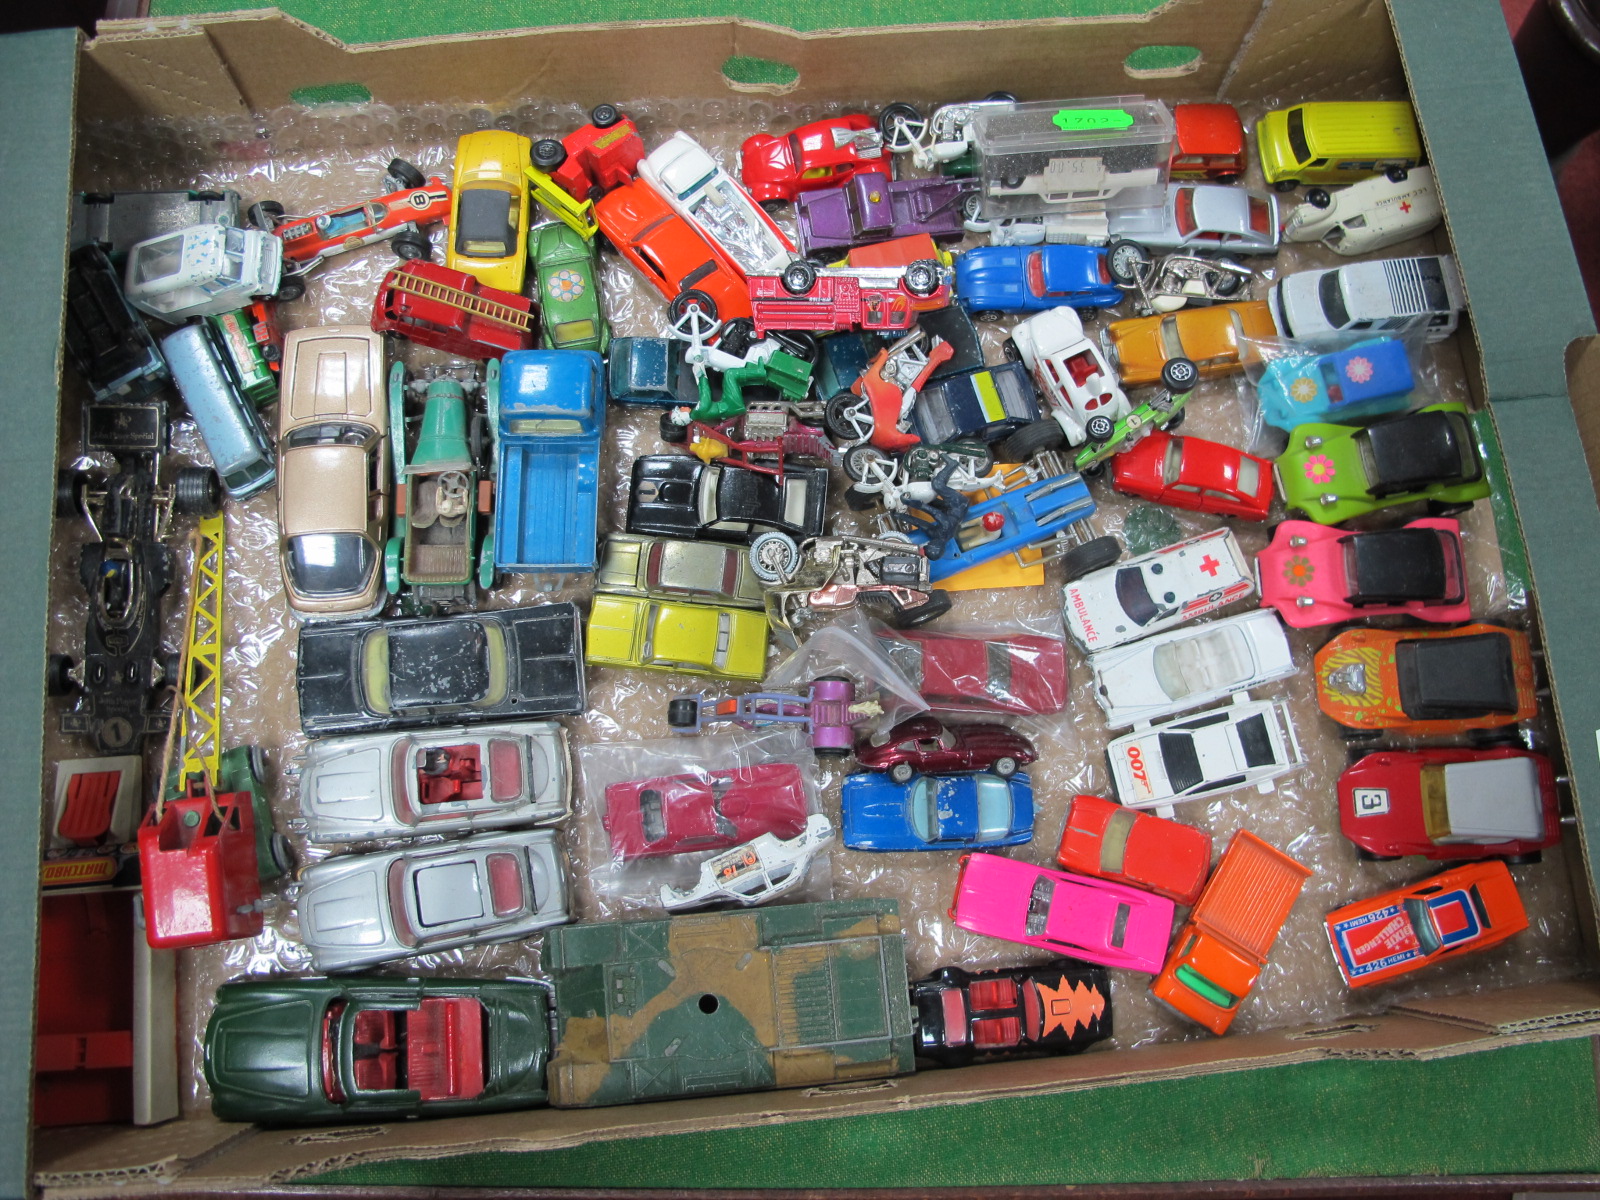 A Quantity of Diecast Vehicles, by Corgi, ERTL, Matchbox and others, all playworn, tv themes noted.